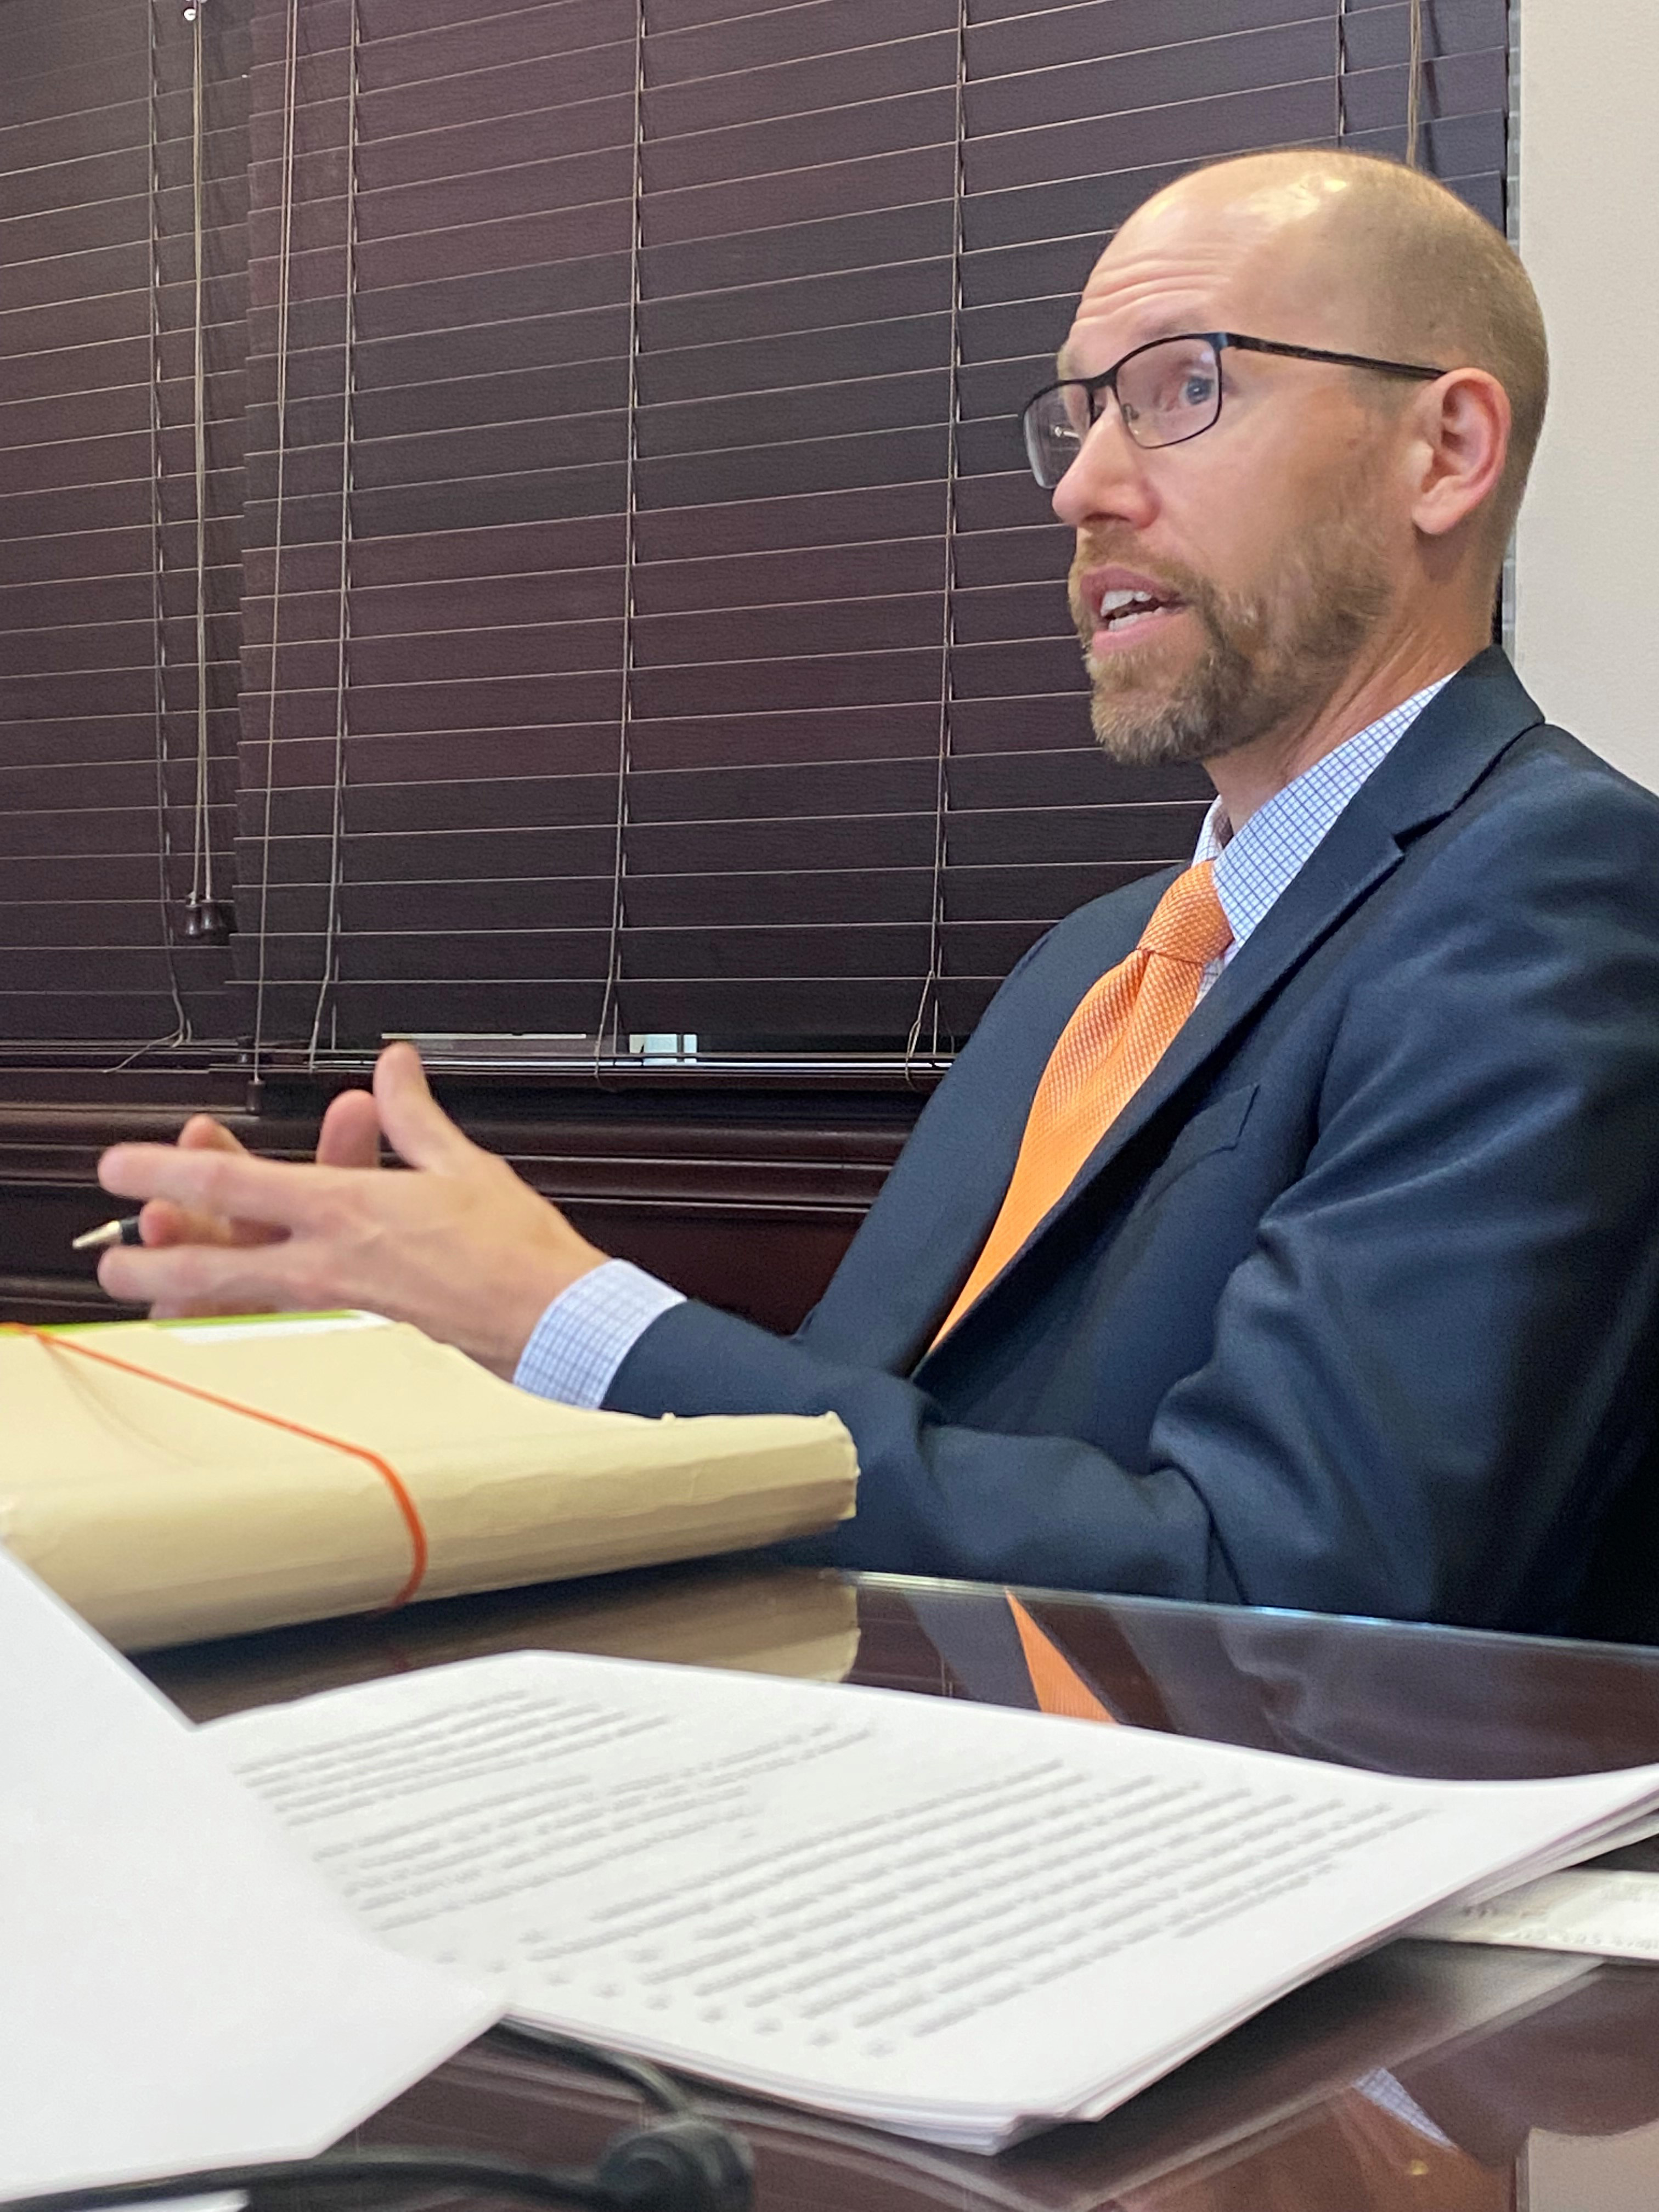 August 13, 2021: Mr. Brendon Vavrica, AndCo Consulting, addressed the Board concerning the seamless transition as the Investment Consultant as a result of Mr. John McCann retirement at the end of the year.